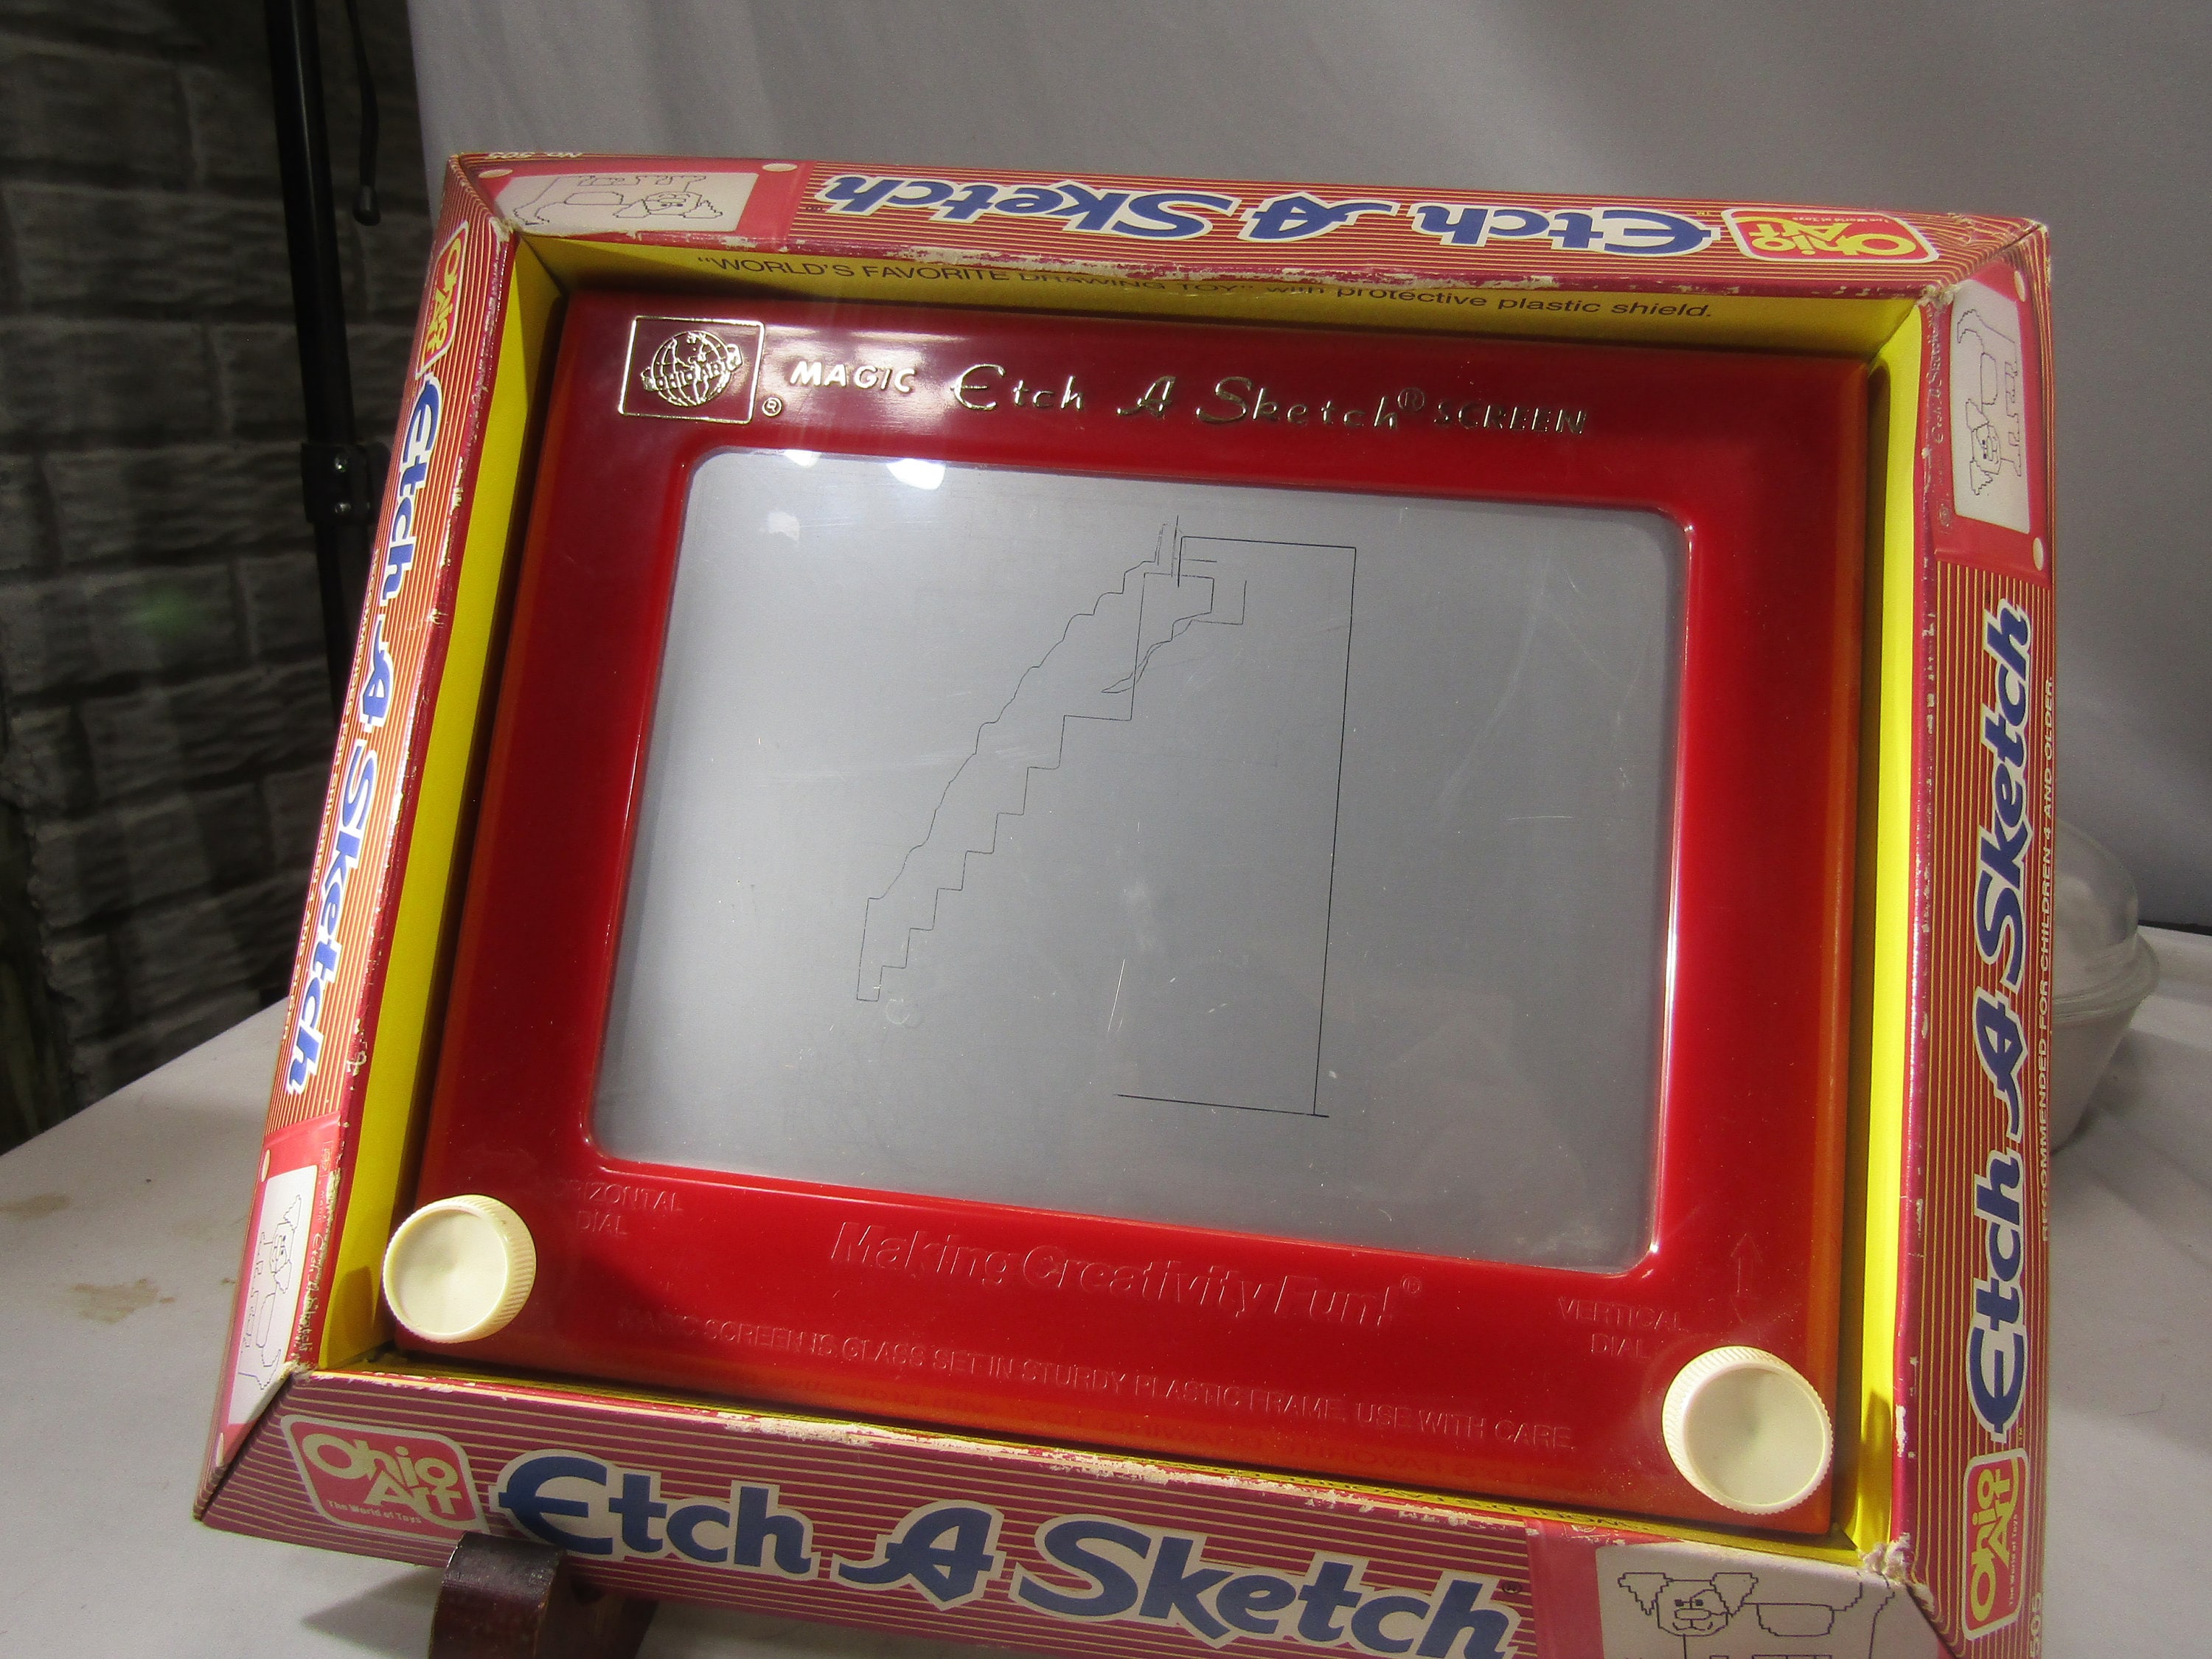 Ohio Art Color Etch a Sketch 1993 Made in USA Arts and Crafts Vintage Toy  for sale online